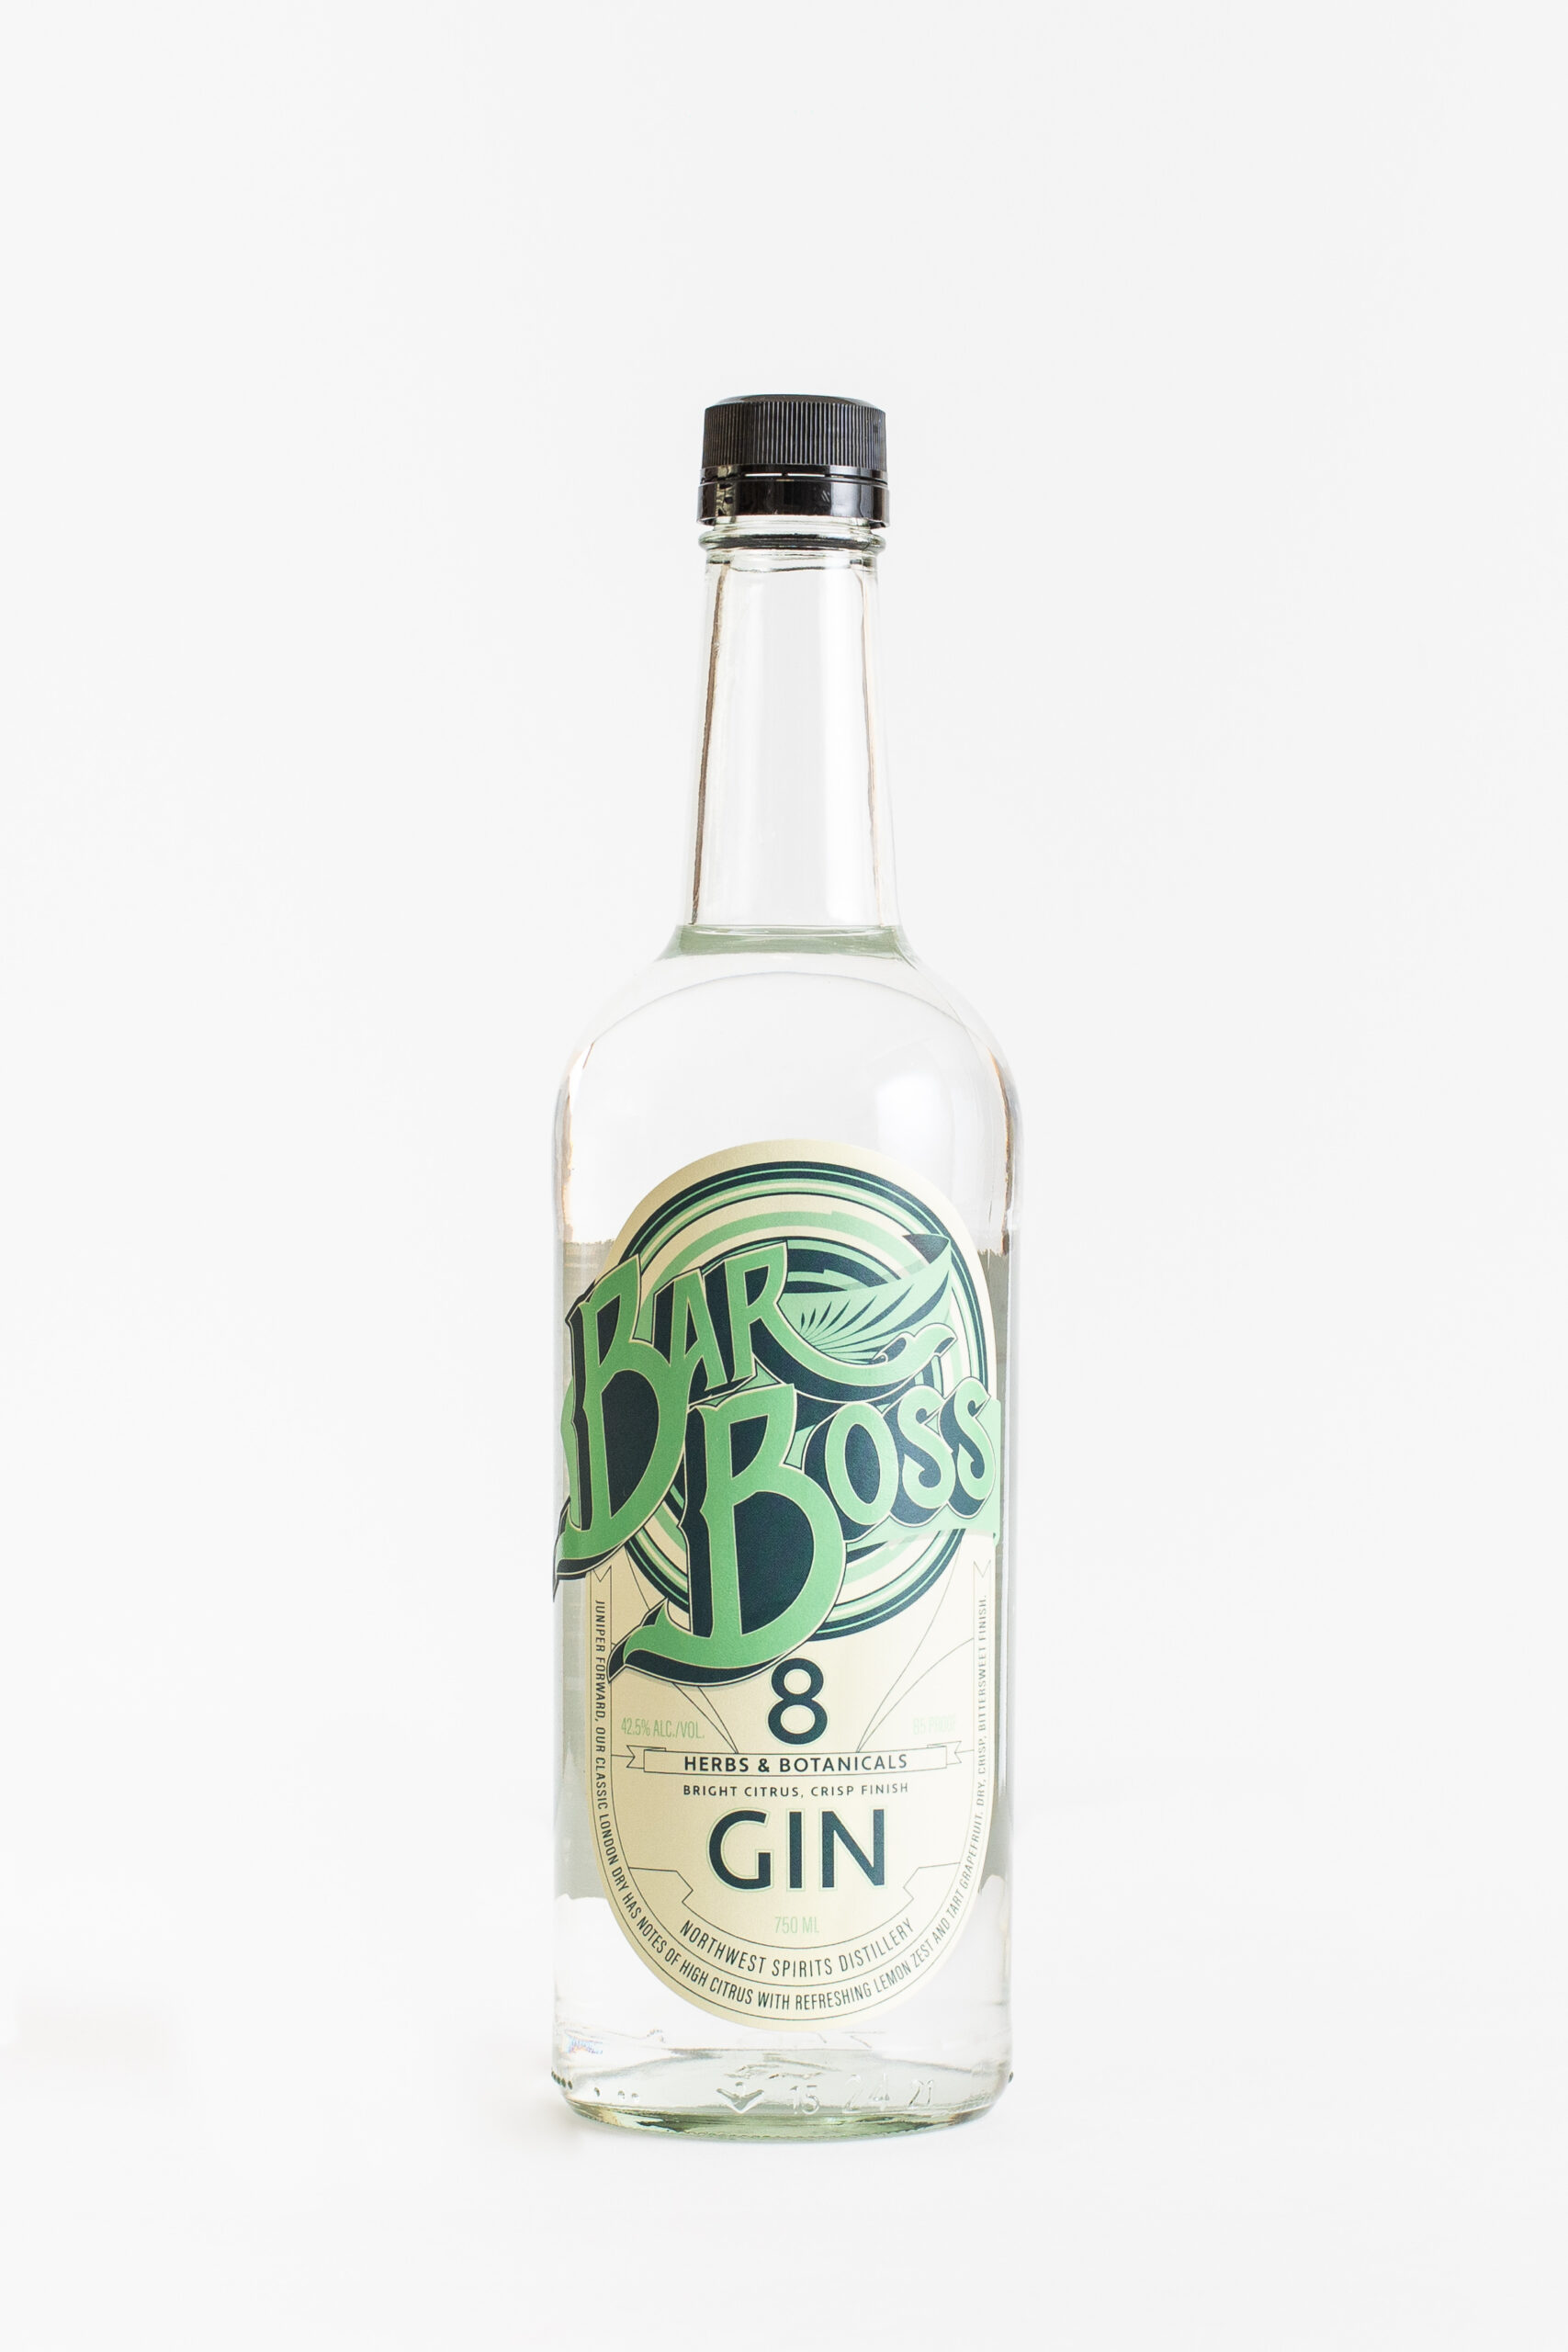 A bottle of Bar Boss Gin sits on a clean white backdrop